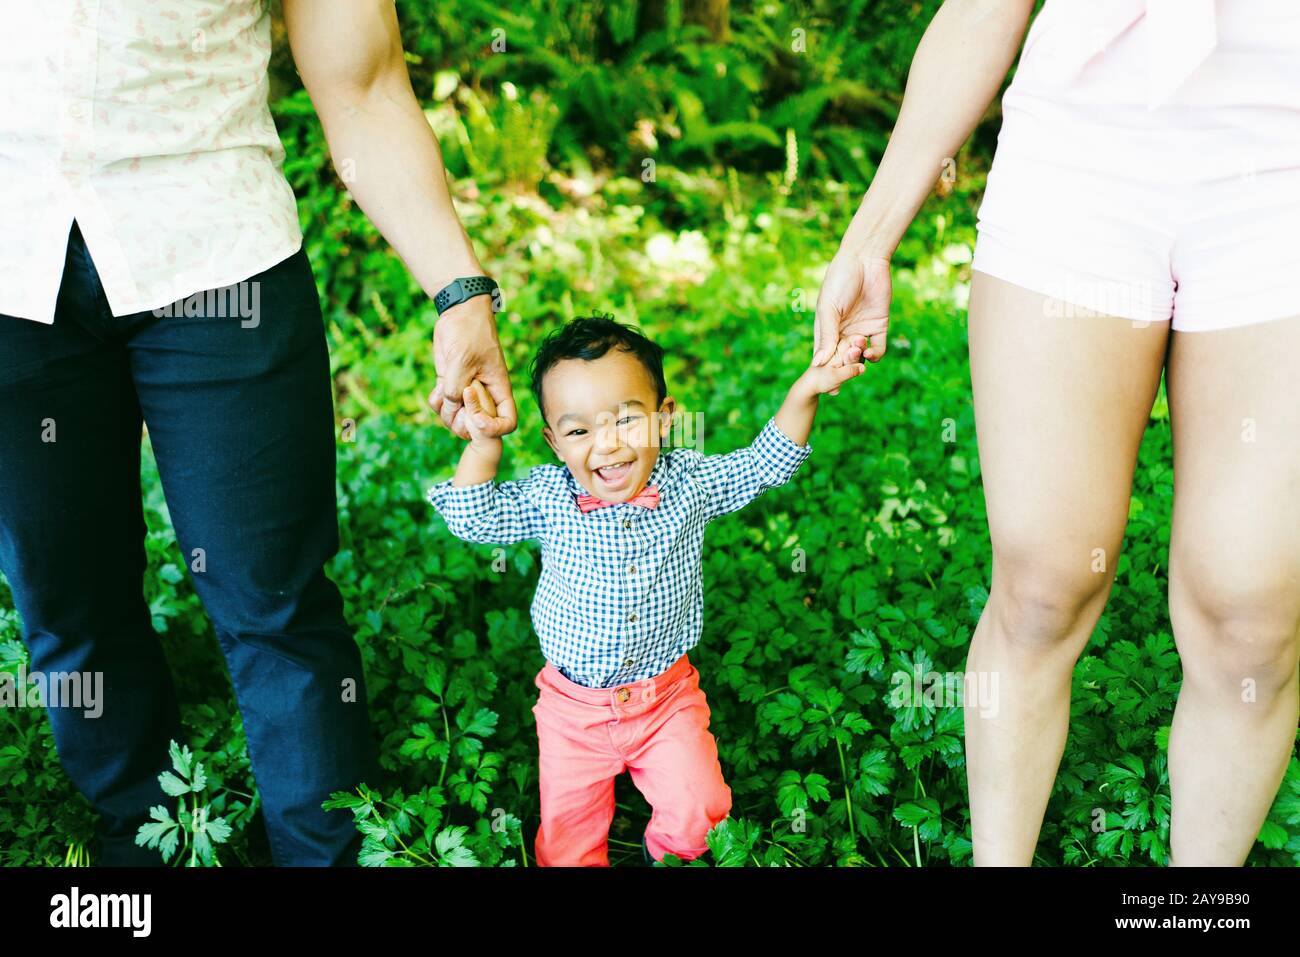 Cropped view of a smiling baby boy holding his parent's hands Stock Photo